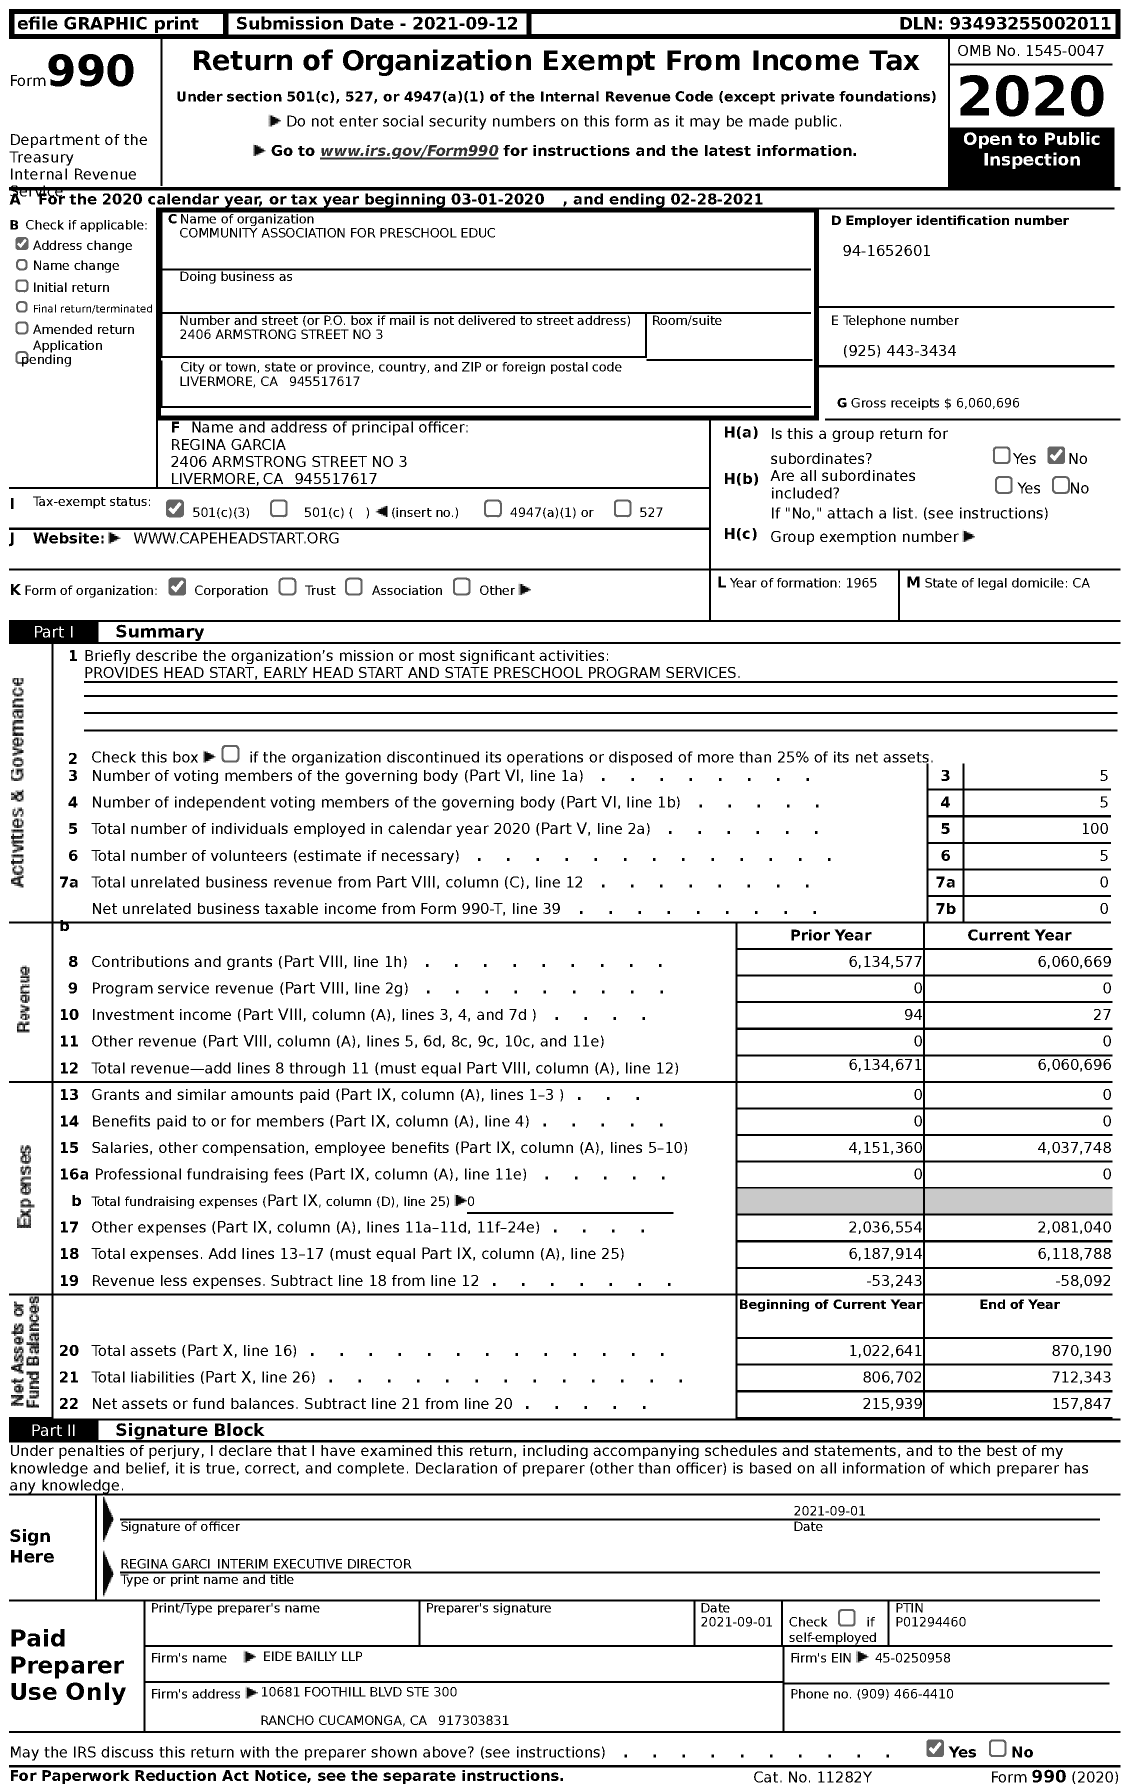 Image of first page of 2020 Form 990 for Community Association for Preschool Education